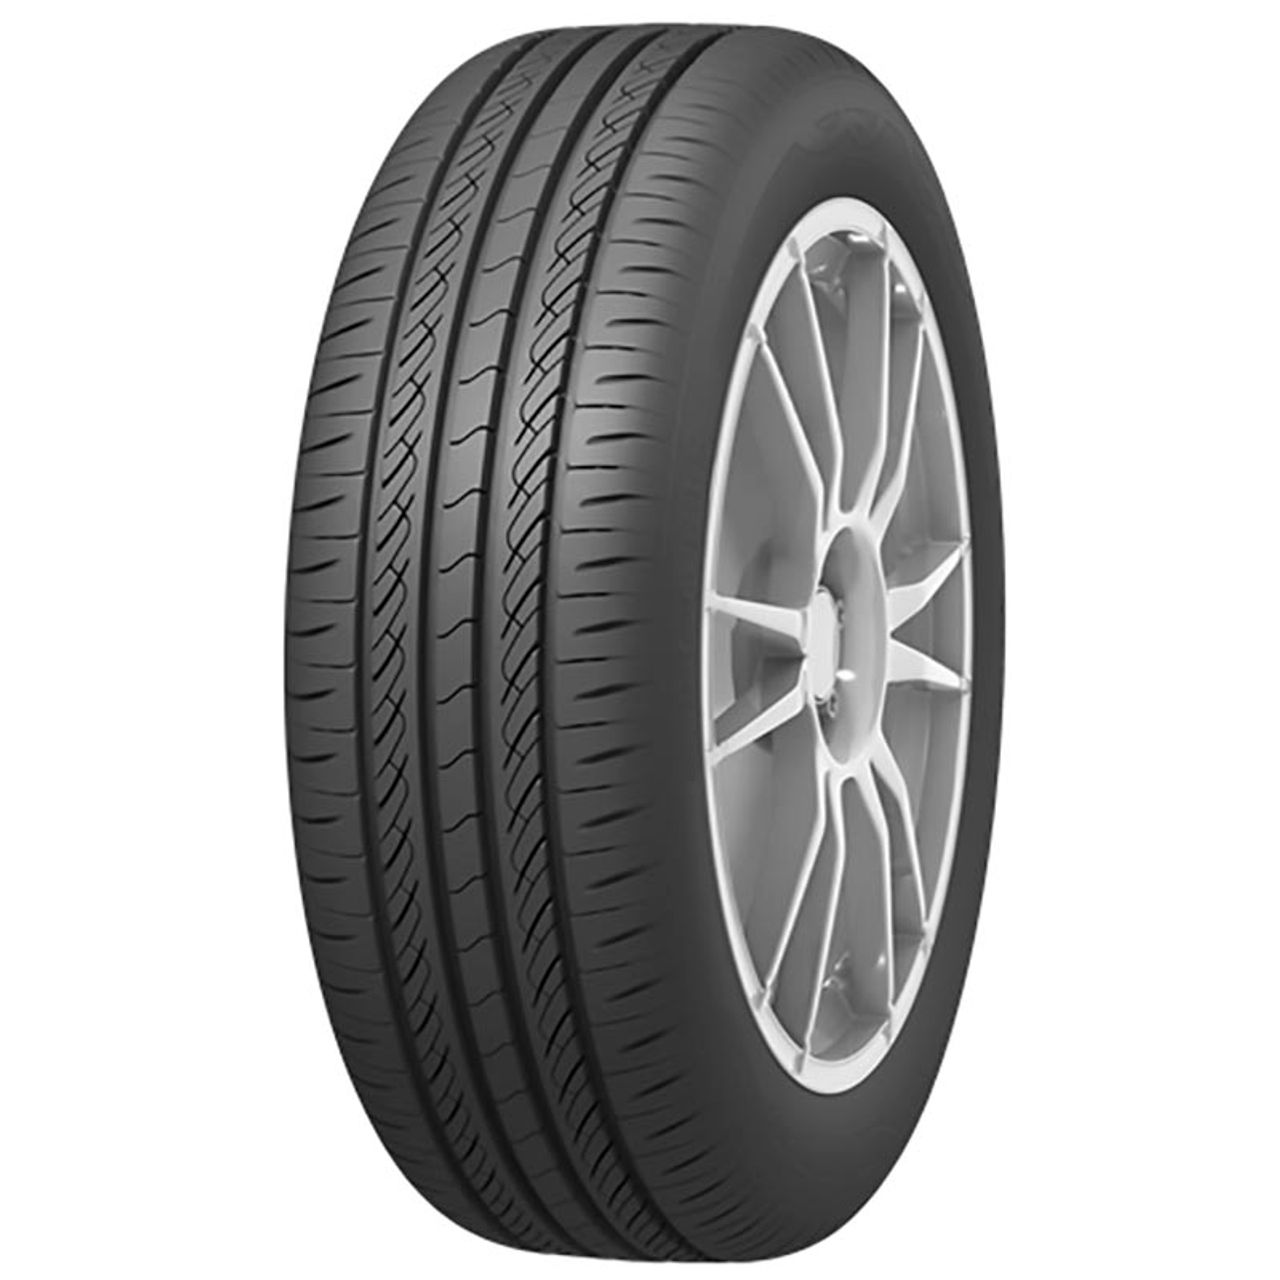 INFINITY ECOSIS 195/65R15 91V BSW